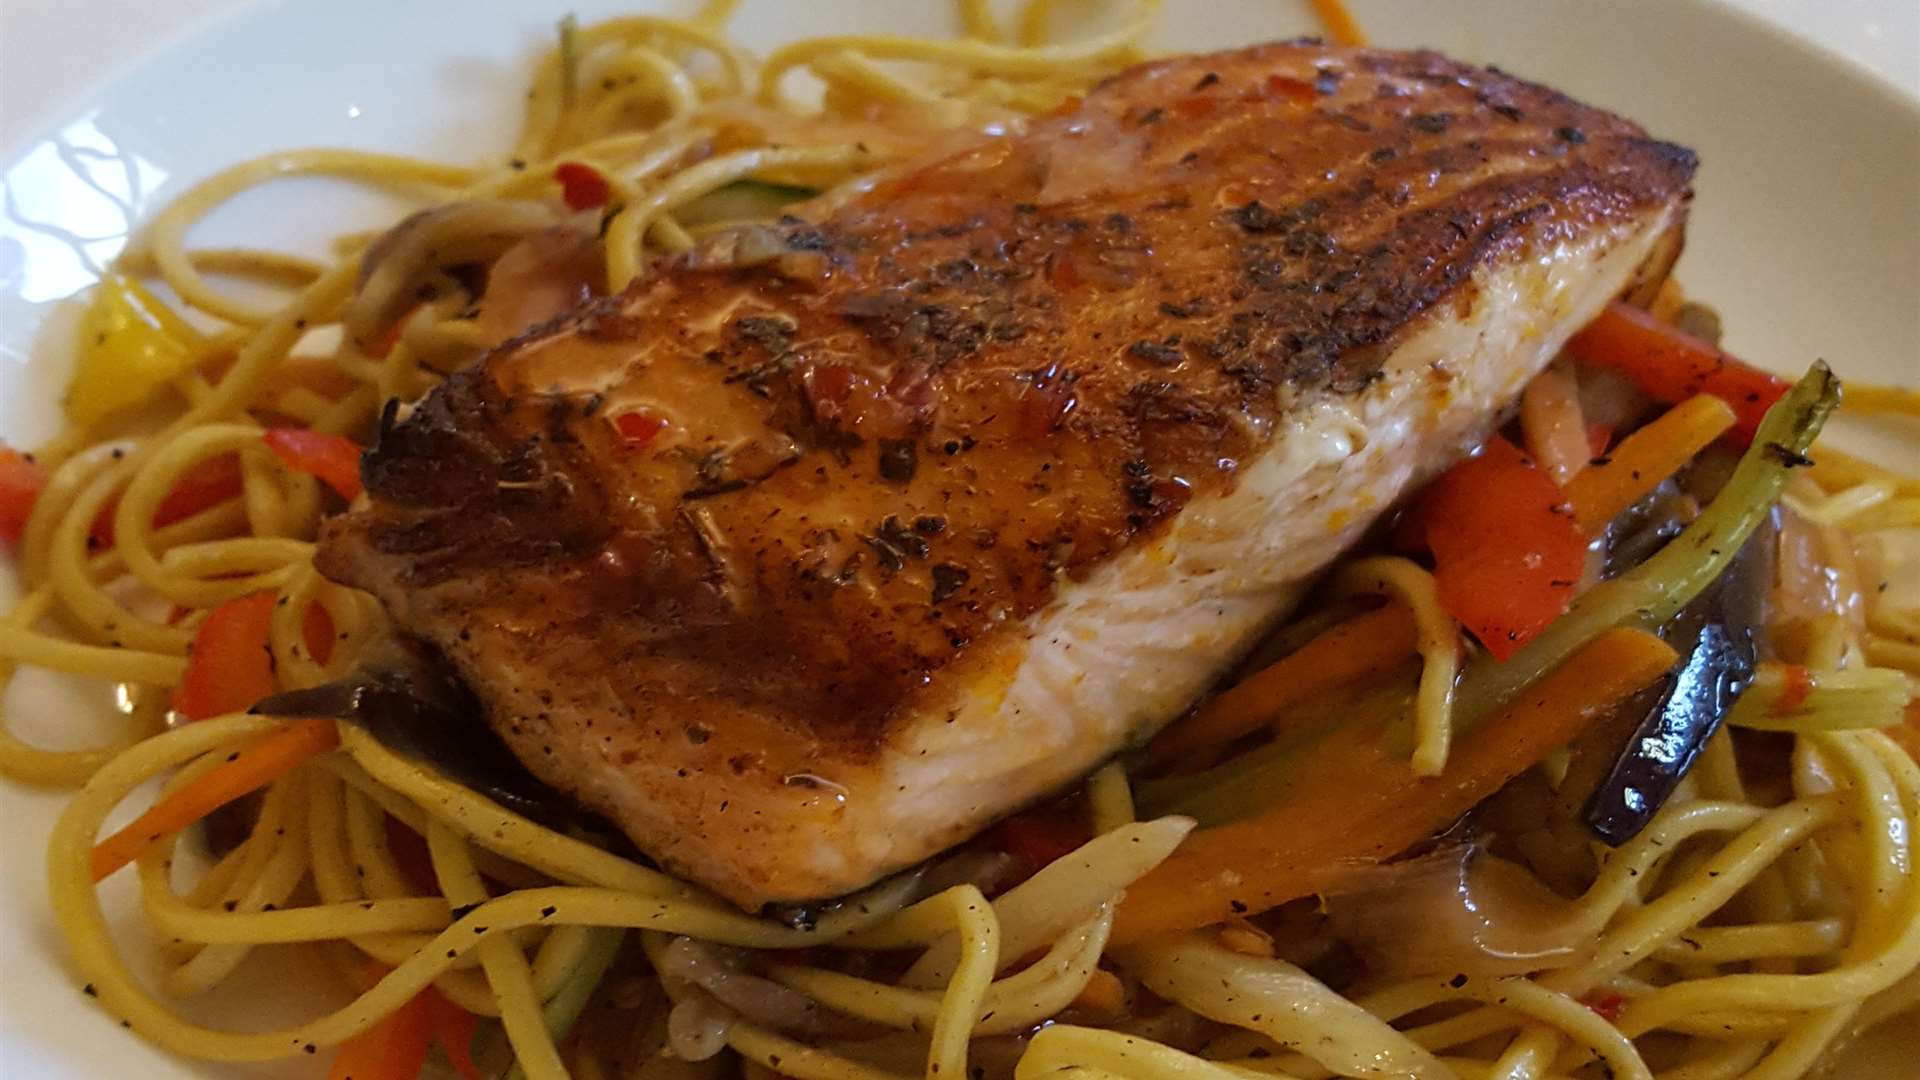 Catch of the day - salmon with noodles, vegetables and chilli sauce